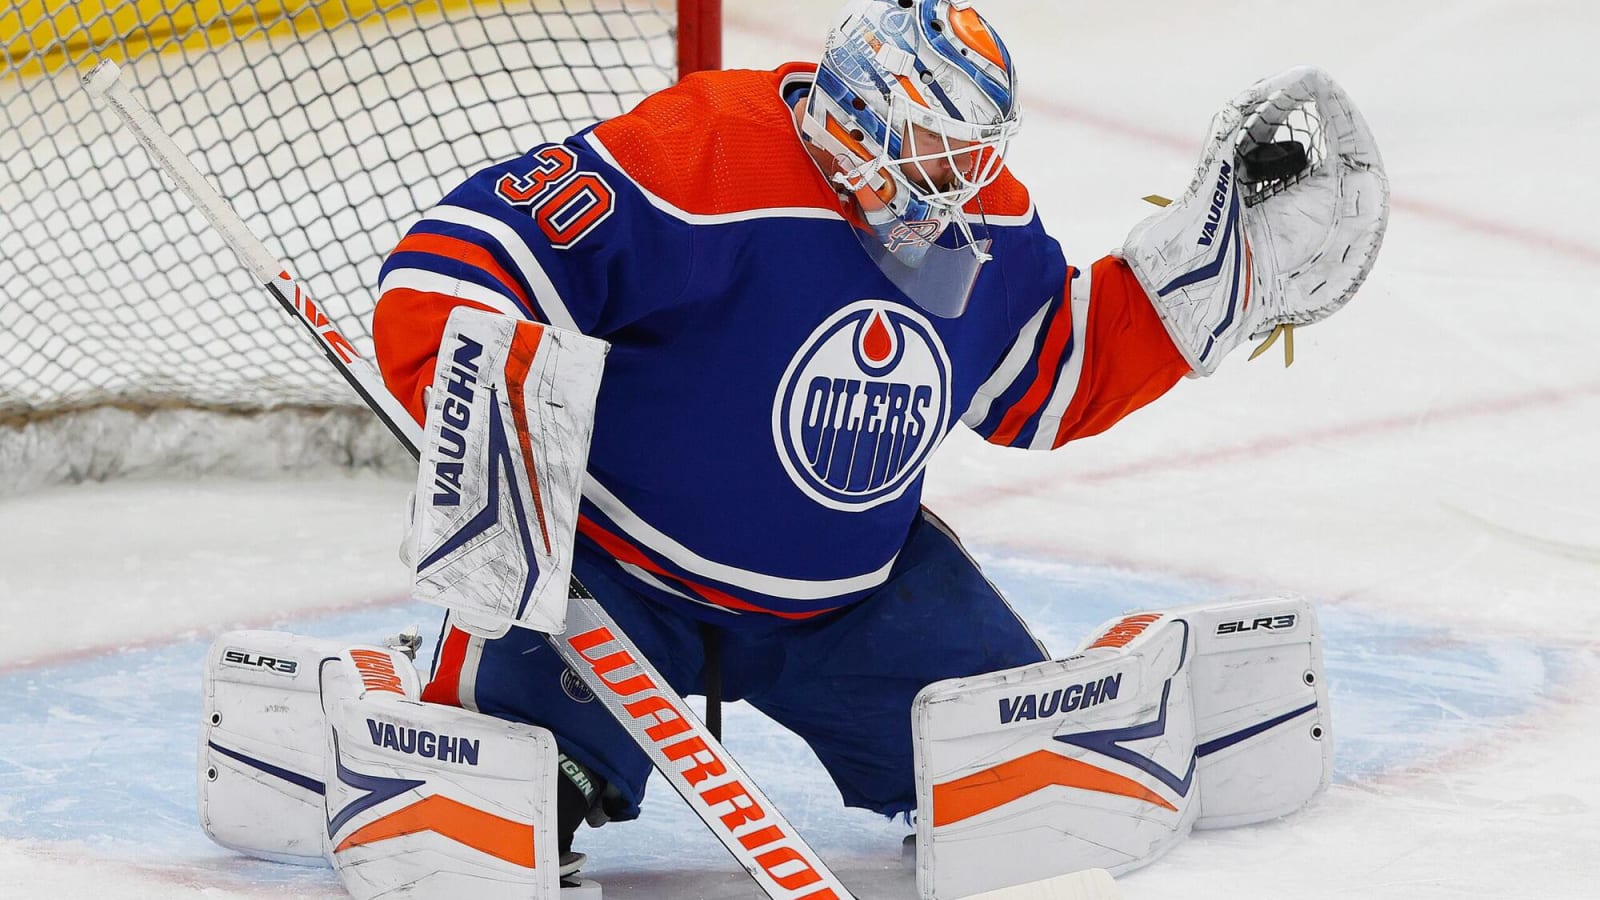 Stanley Cup Playoffs Day 25: Pickard stops 19 in playoff debut as Oilers tie series